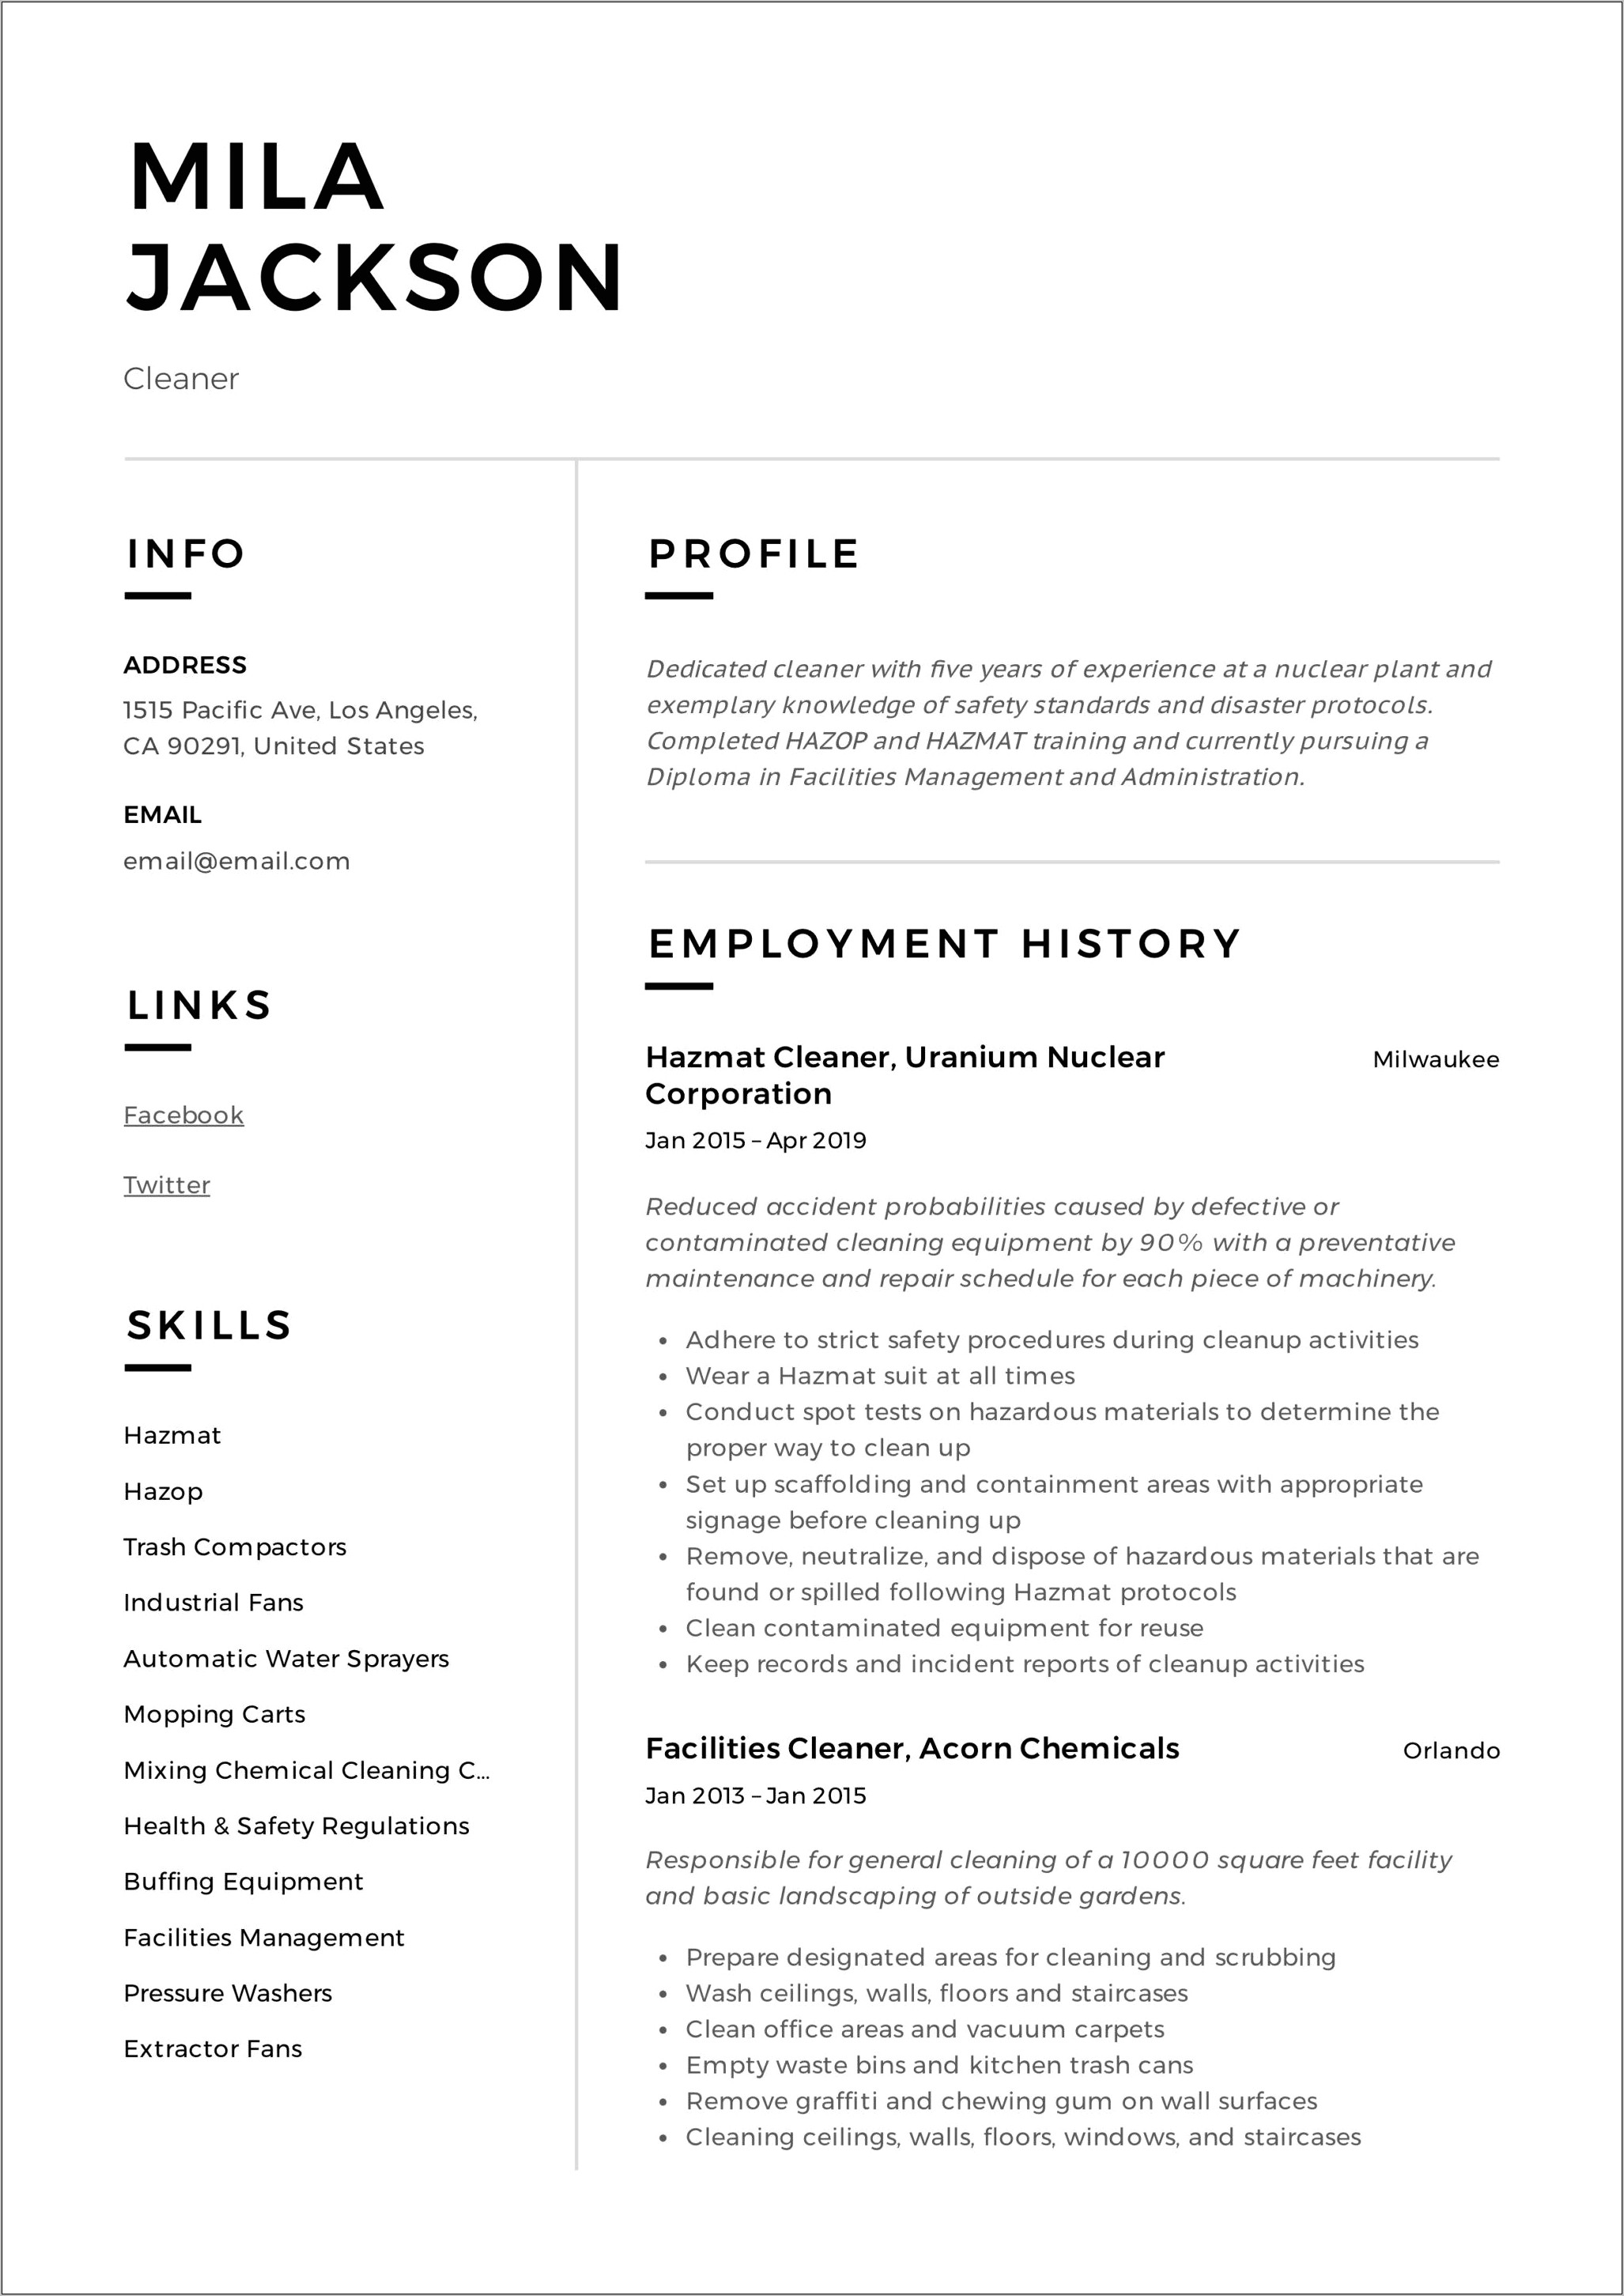 Resume Words For Skills Cleaning Bathrooms